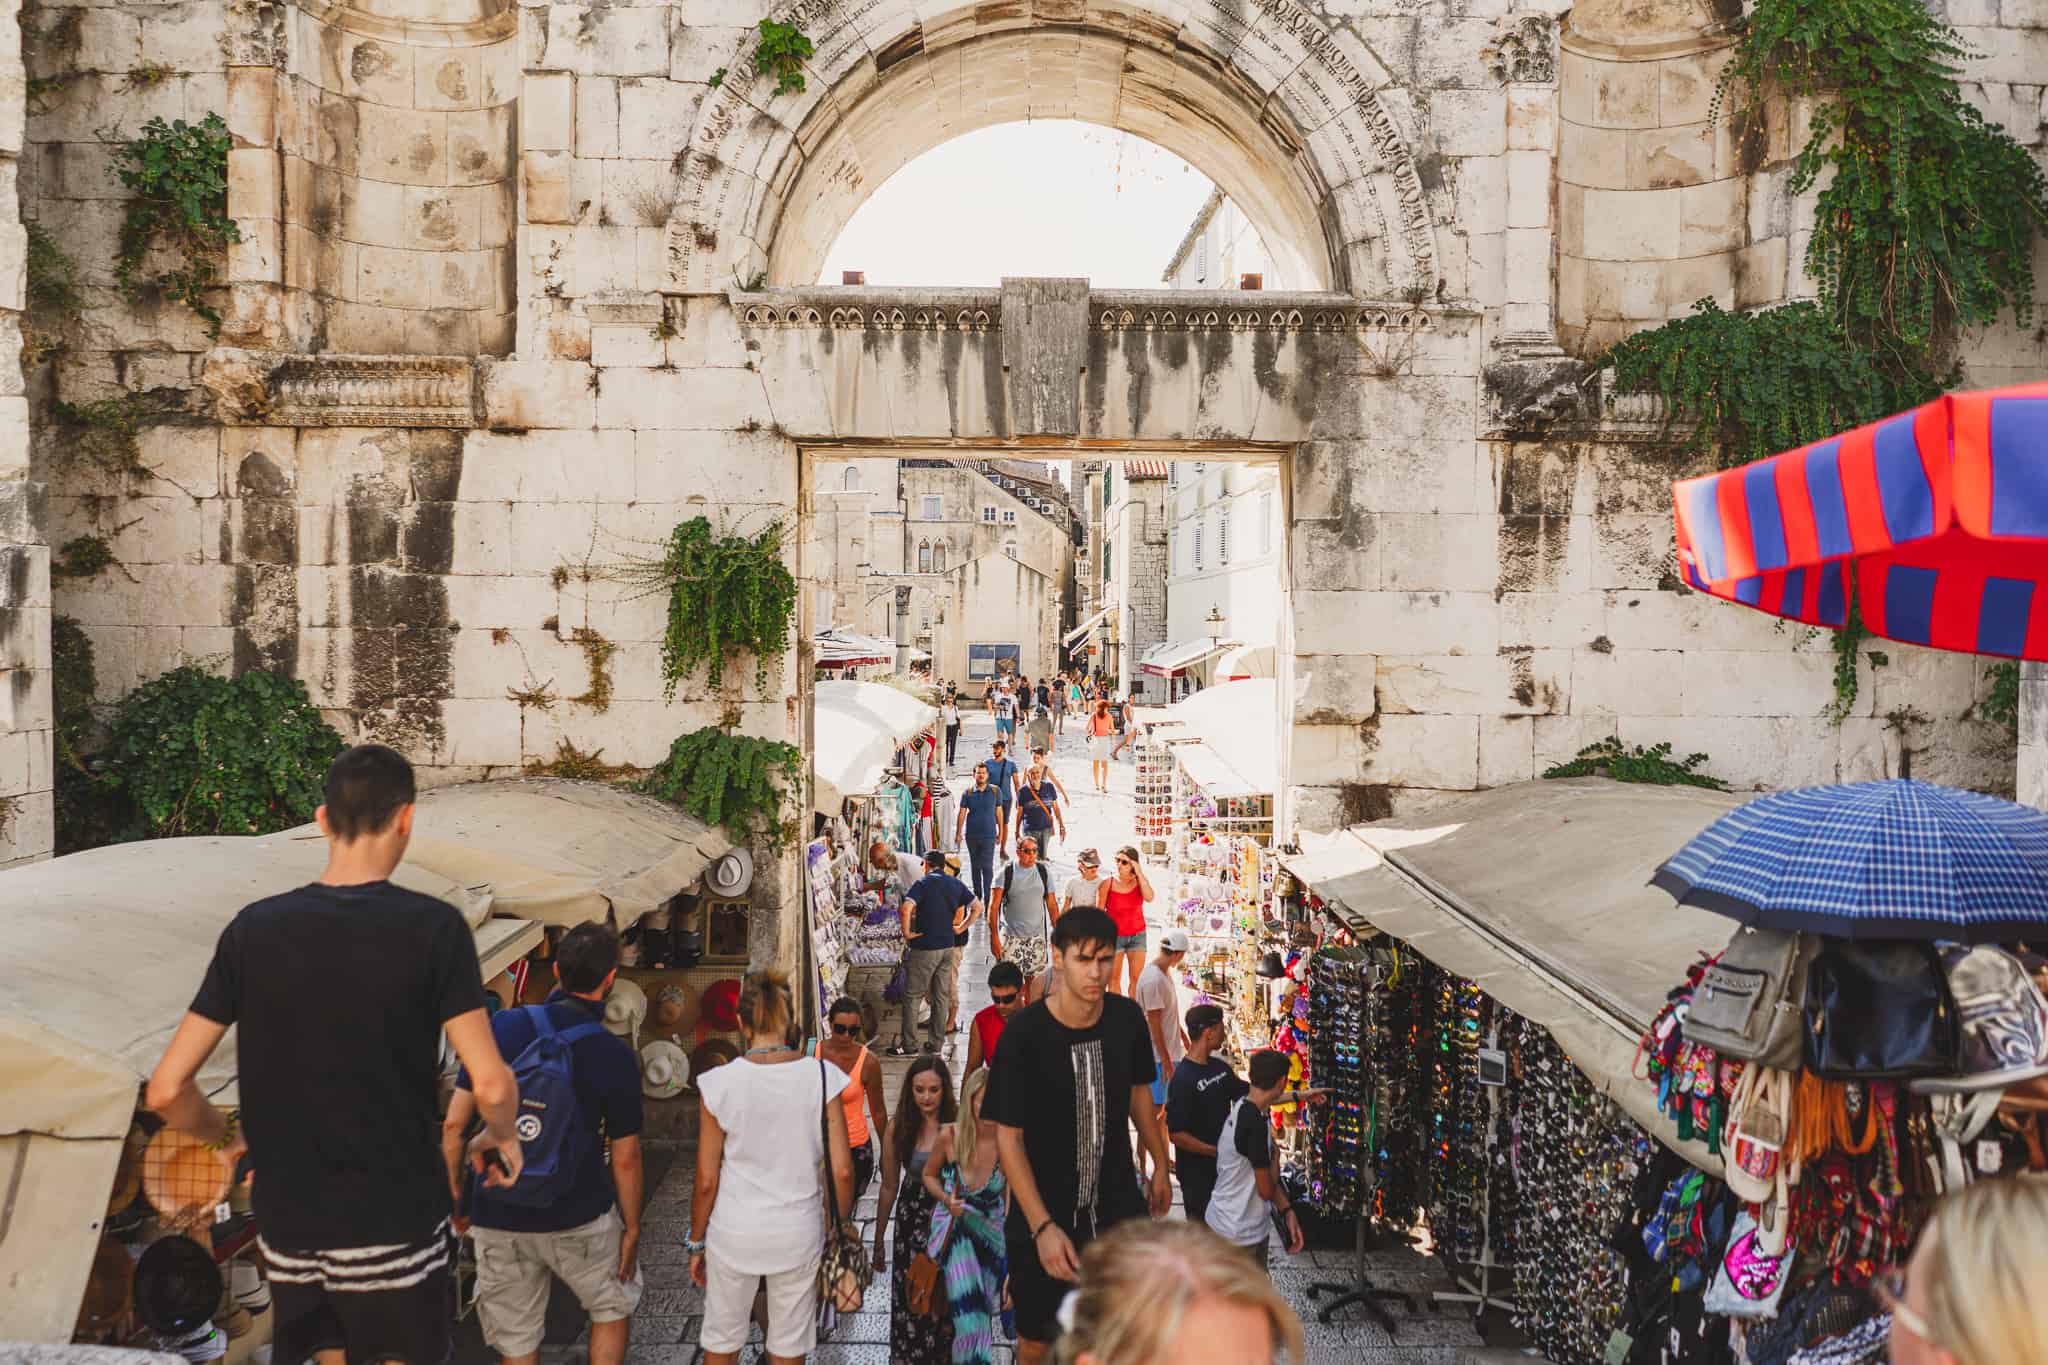 Tourists walking through the markets in the ruins of split Croatia